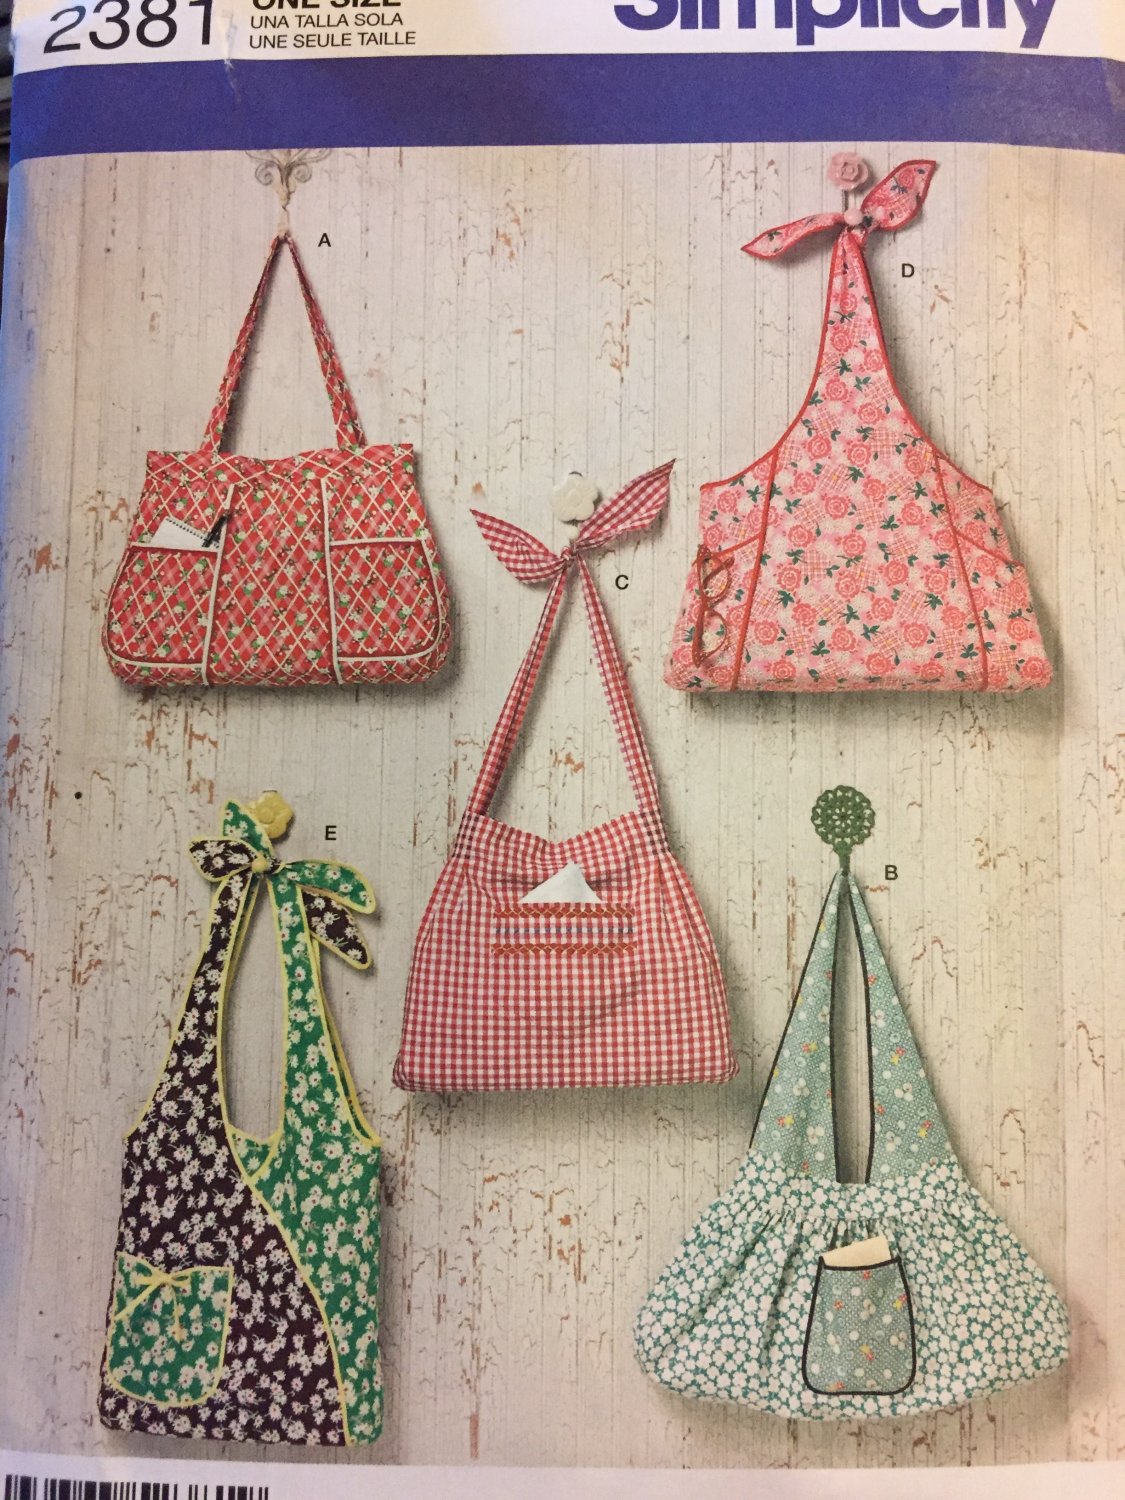 2381 Simplicity  Bags 5 Designs for Bags or totes or purses  UNCUT Sewing pattern